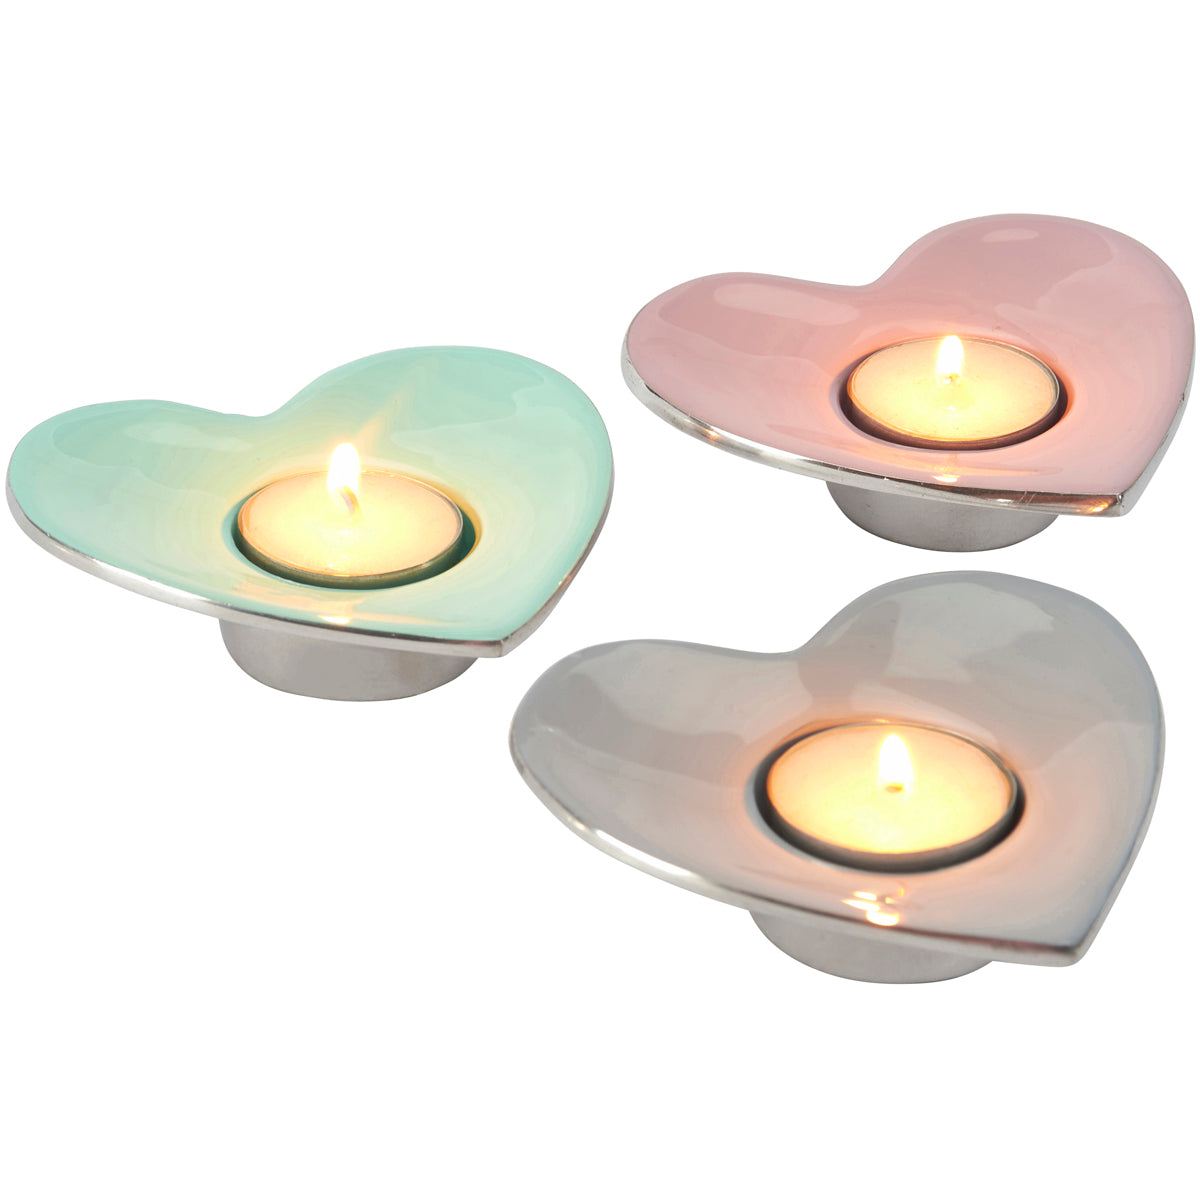 Pretty aluminium candle tea light holders in choice of colours - pink, blue or green